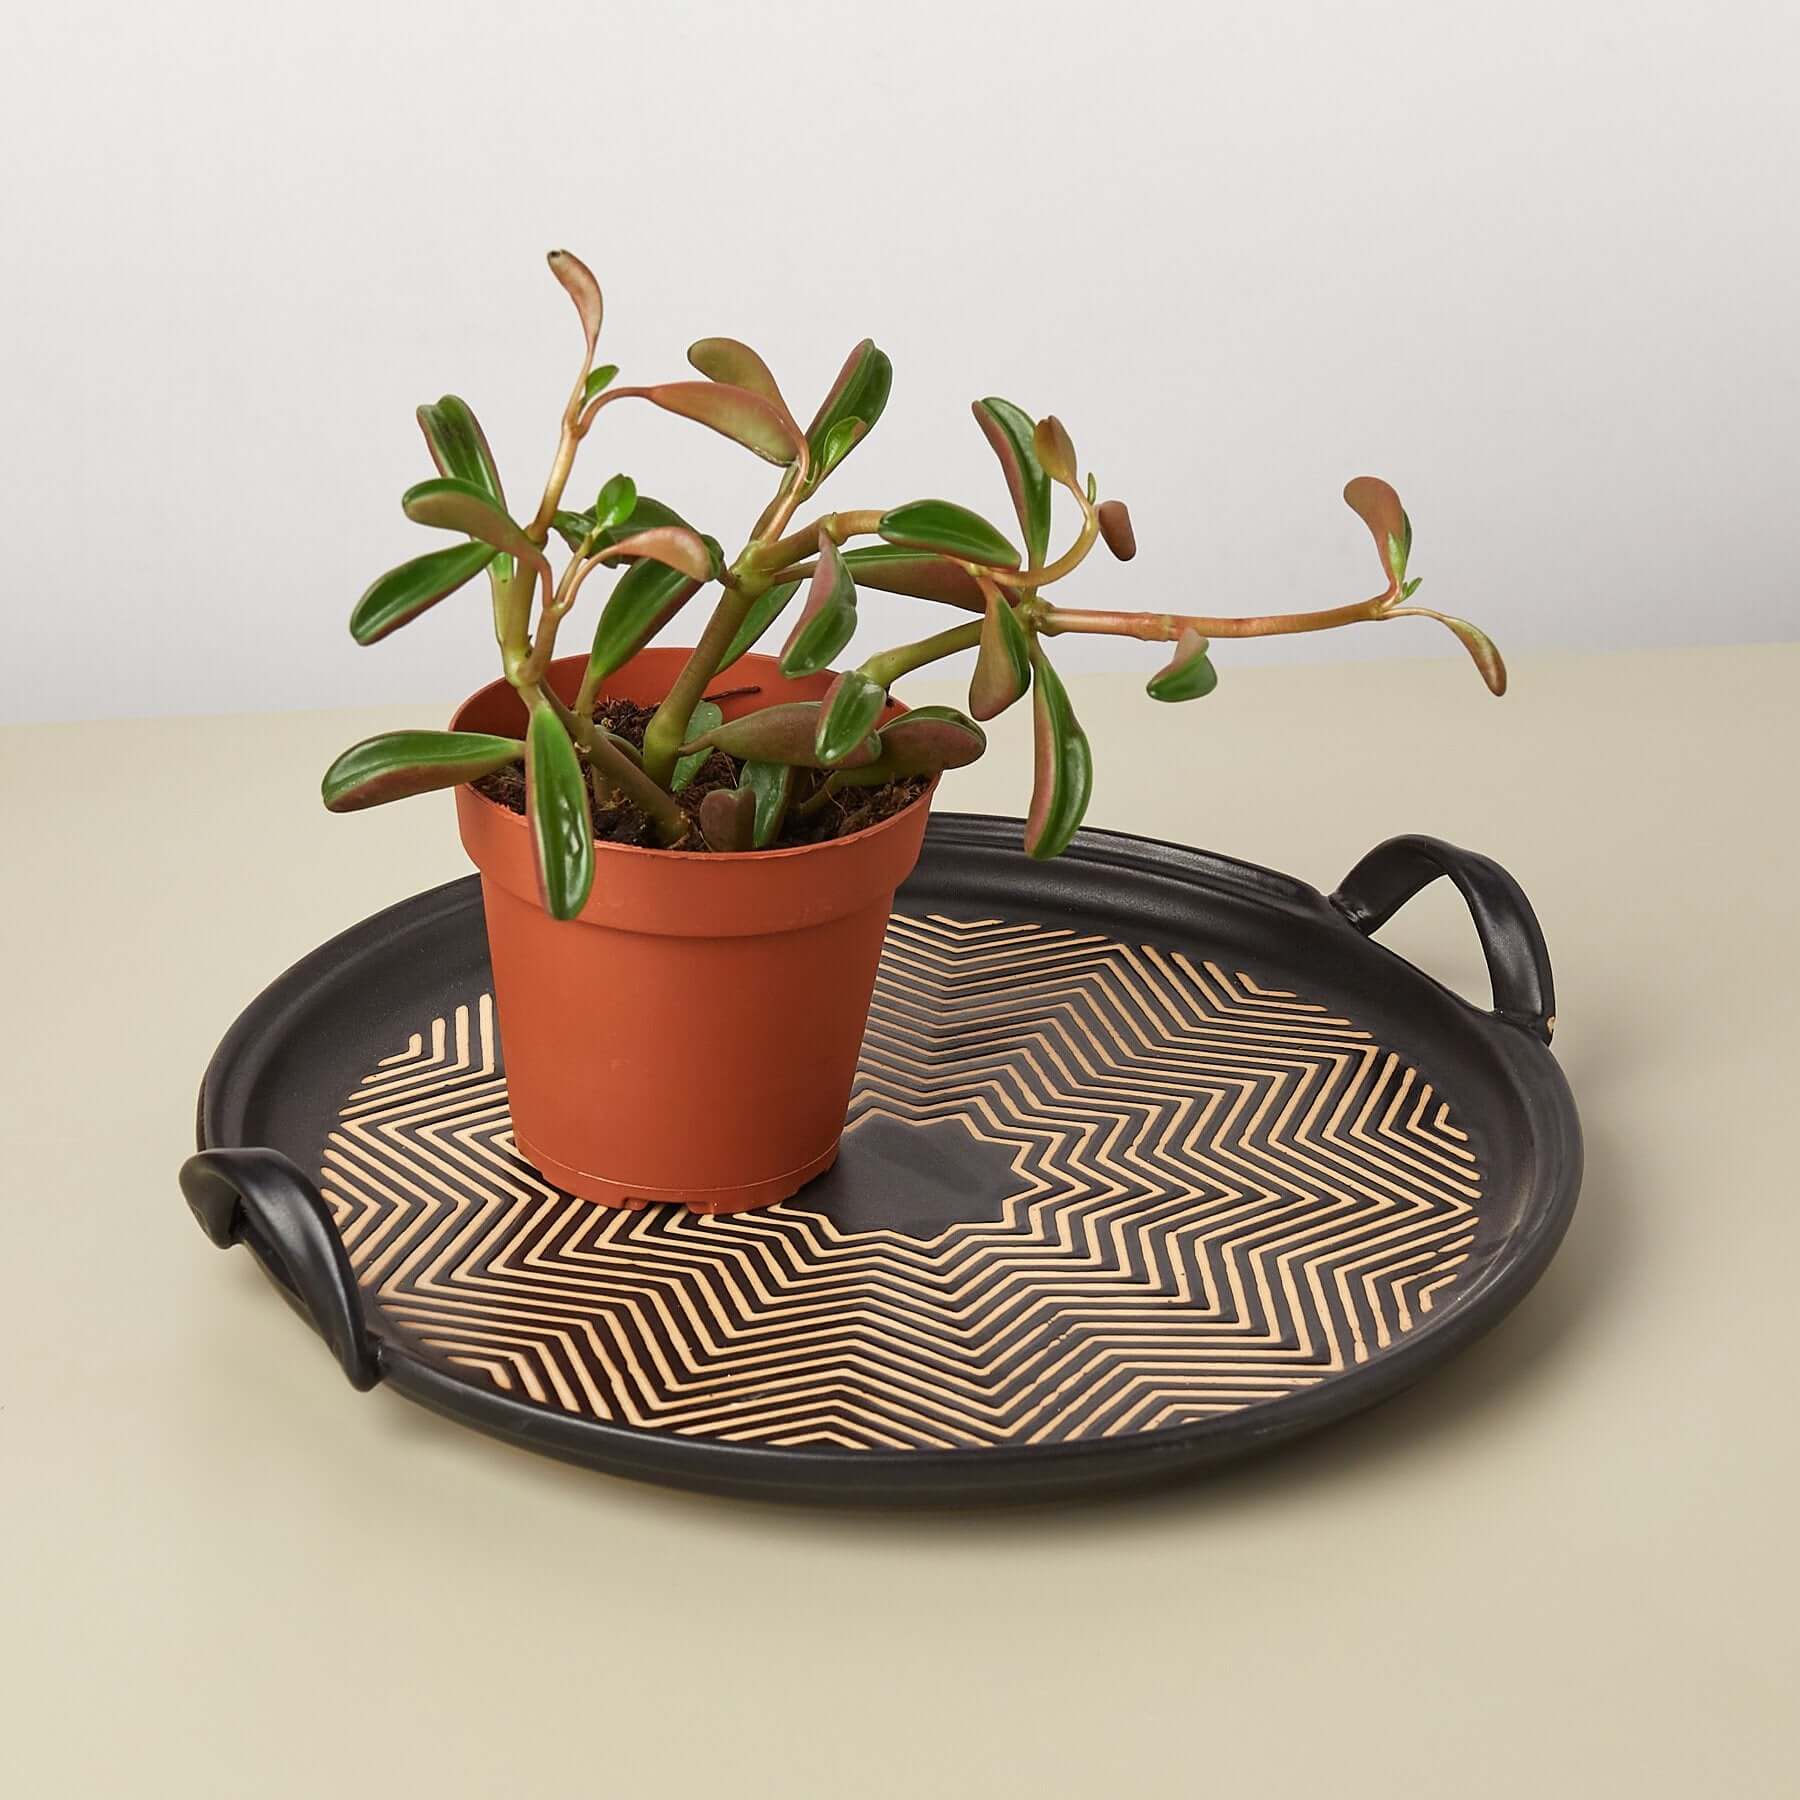 Decorative Tray | Modern house plants that clean the air